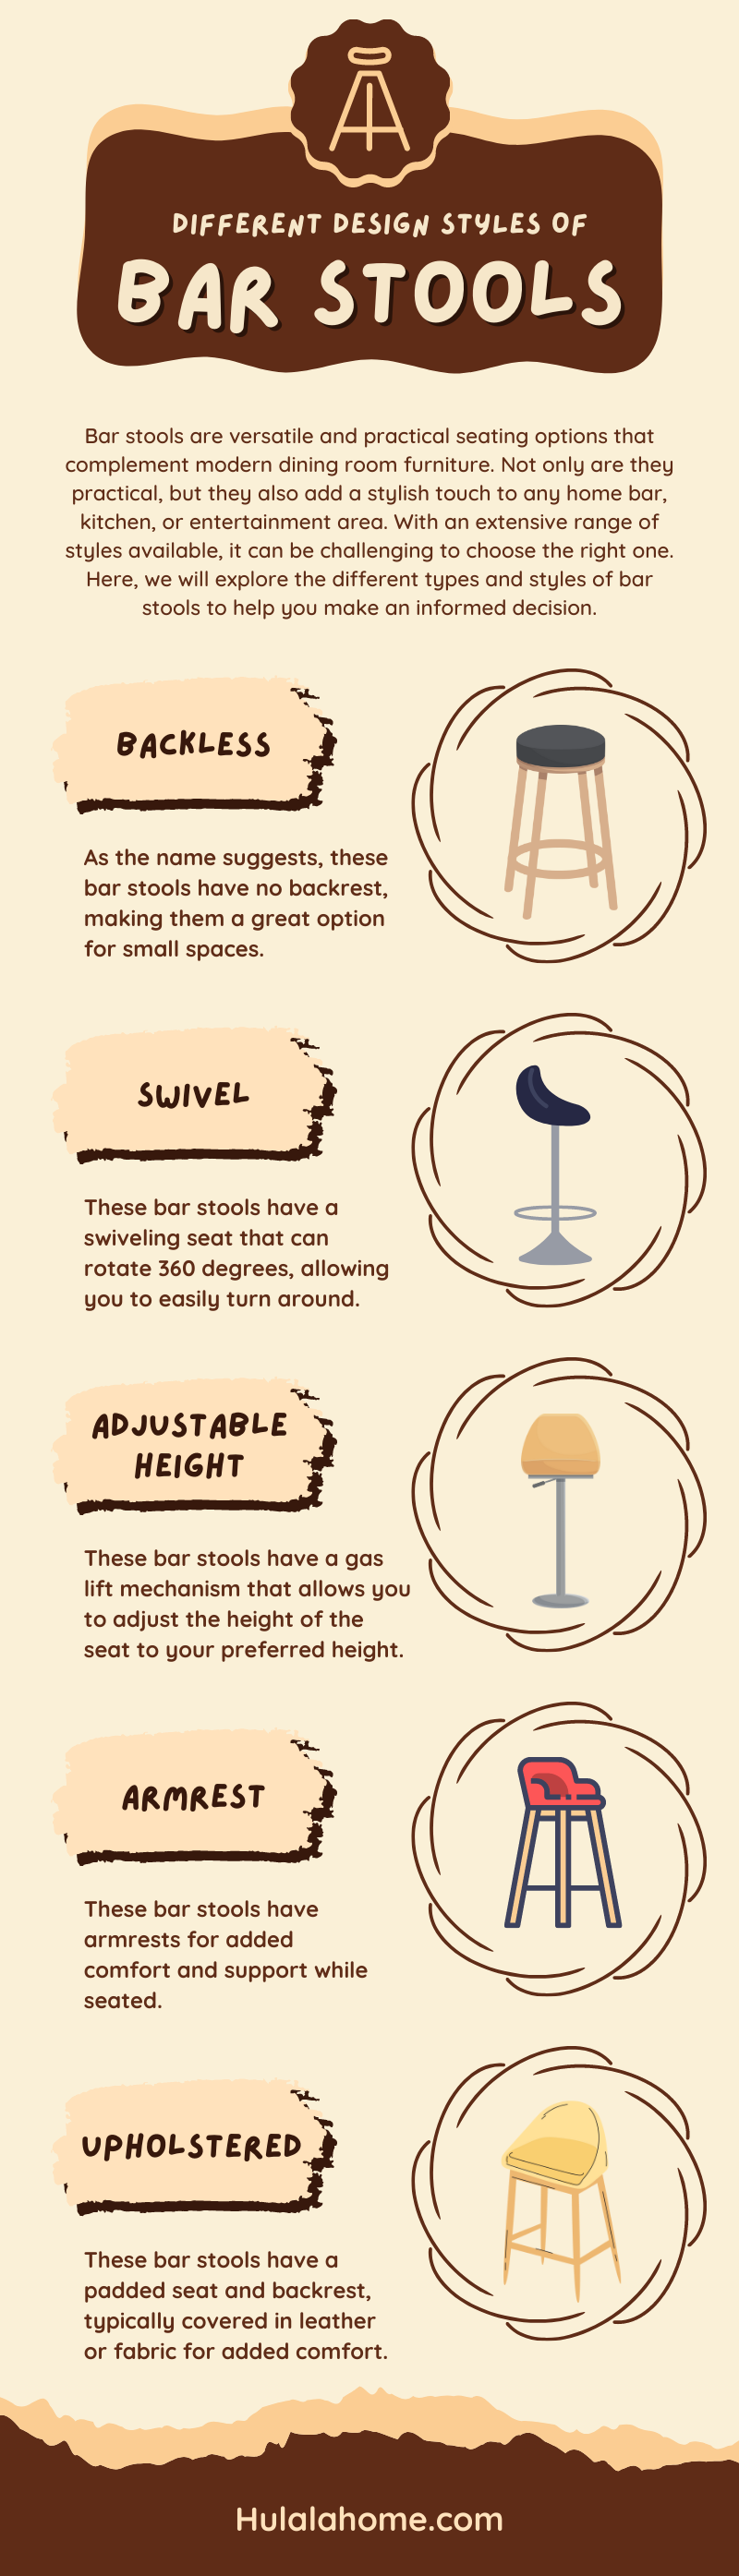 Different Design Styles of Bar Stools